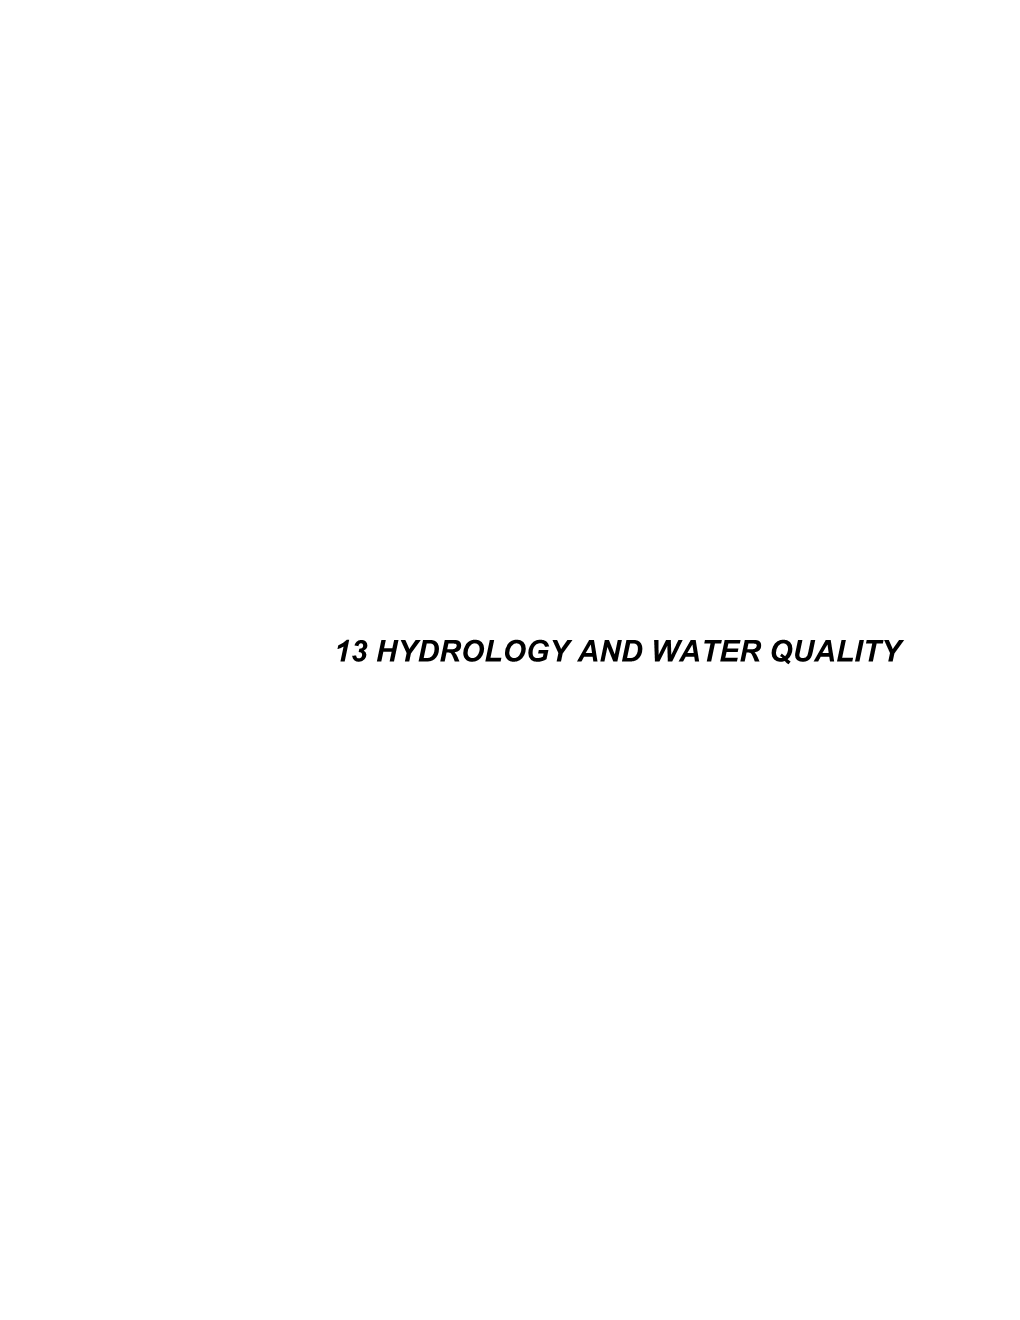 O-Hydrology and Water Quality